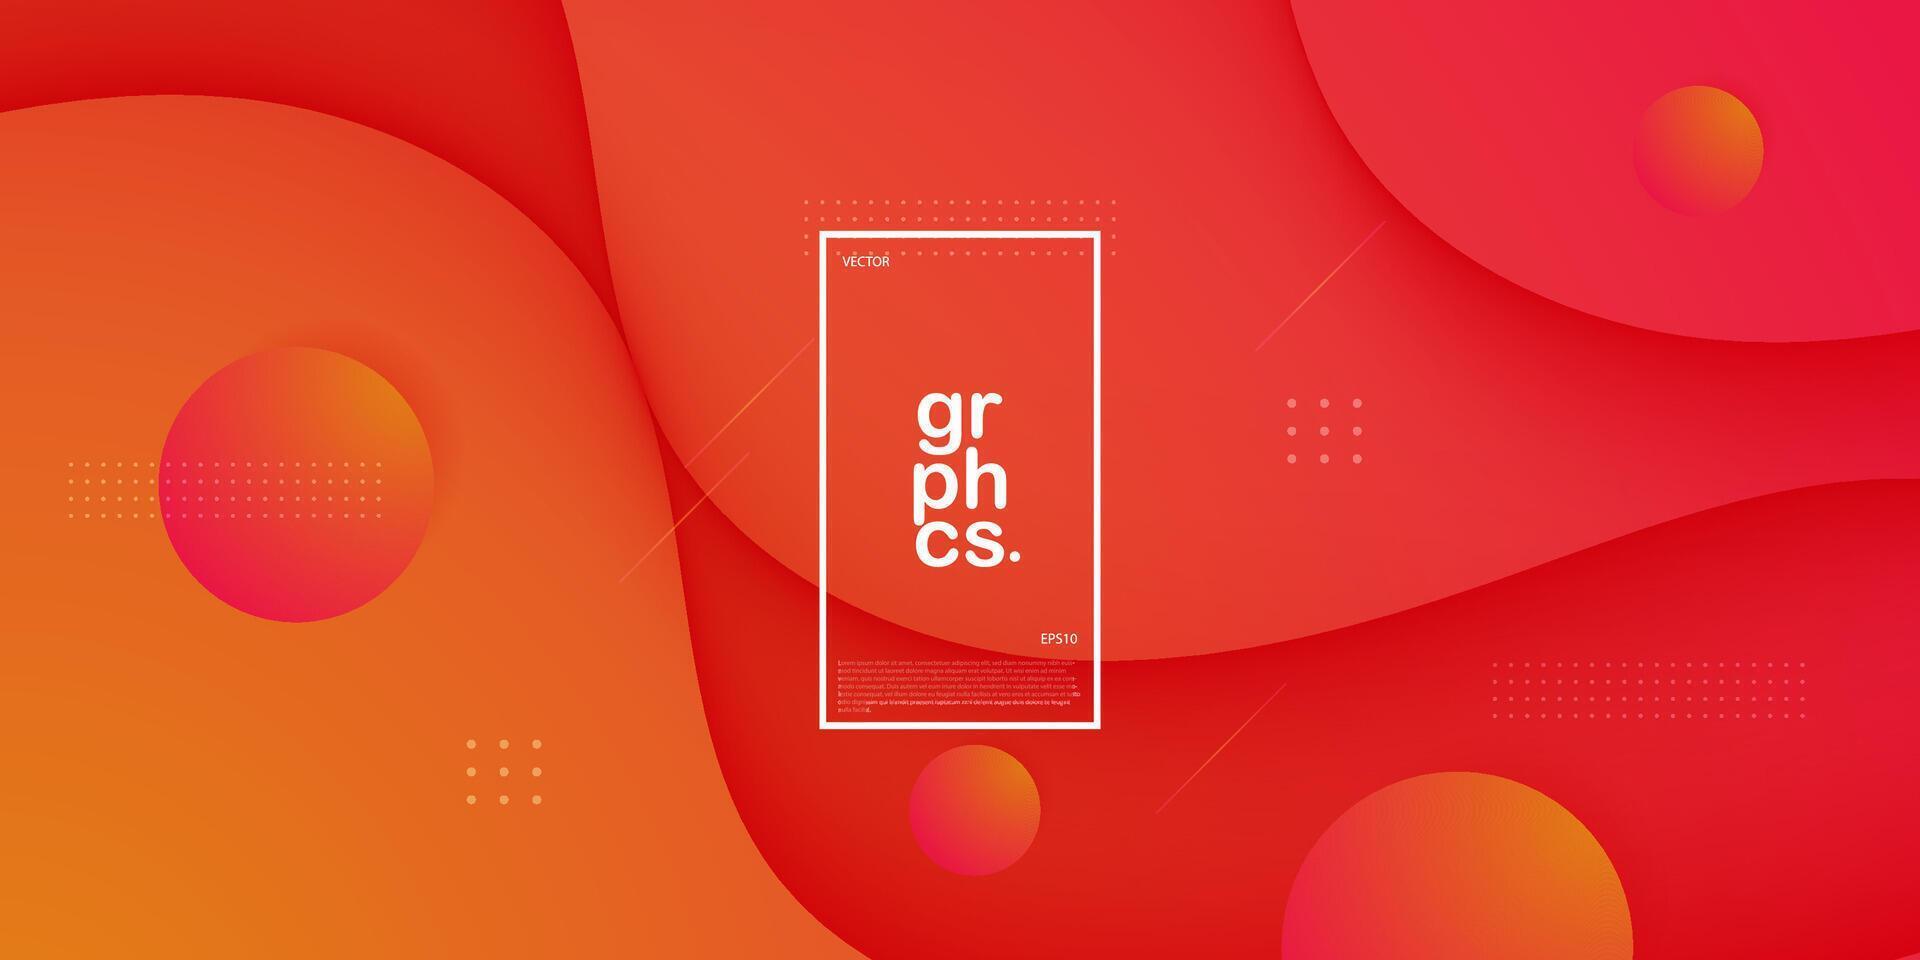 Abstract colorful orange to red gradient background. Wave fluid shapes with geometric pattern. Bright orange background design. Cool and modern concept. Eps10 vector